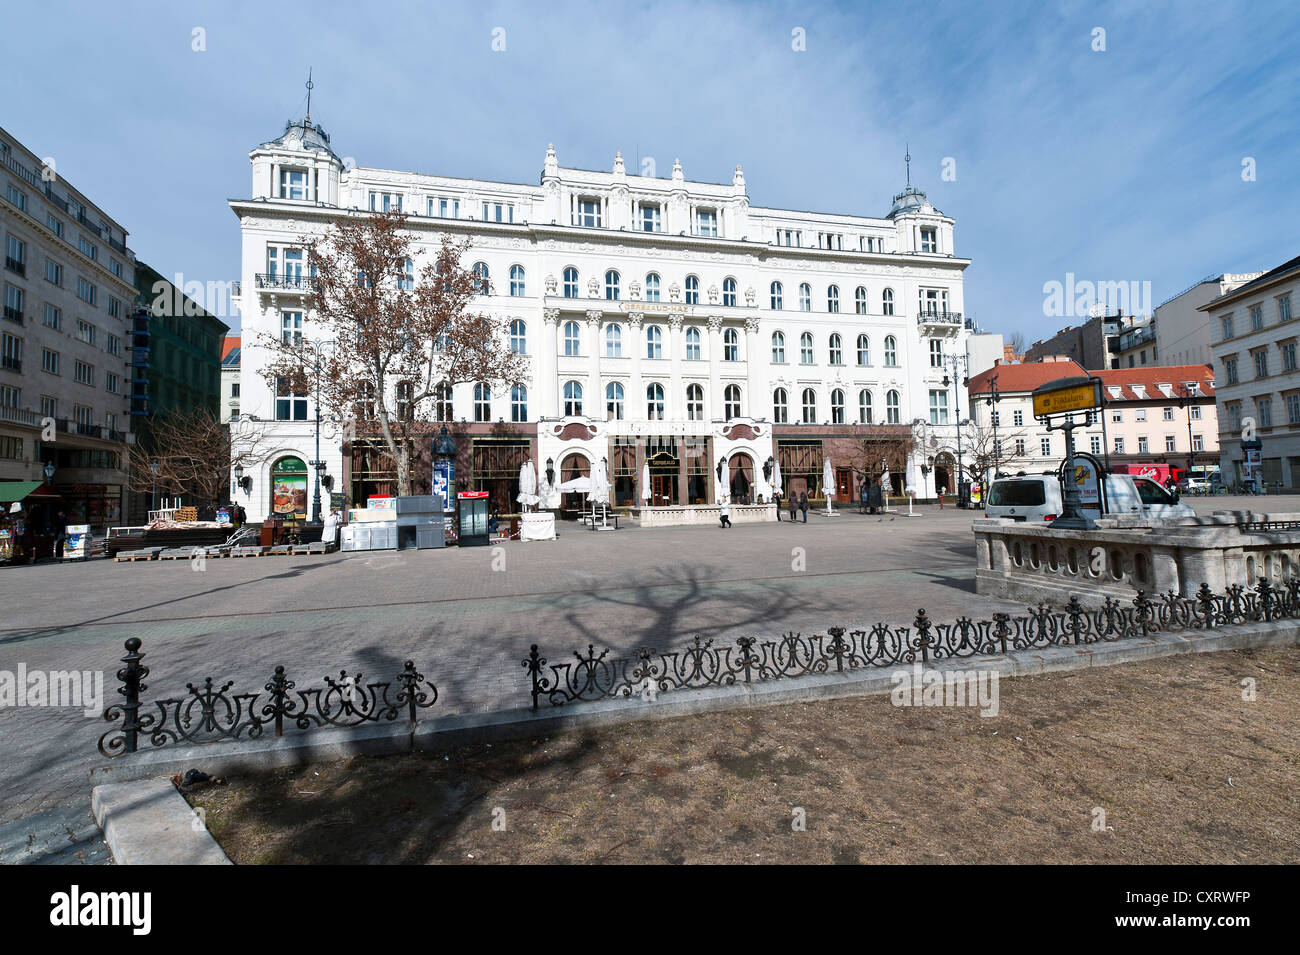 Gerbeaud Café on Voeroesmarty square, one of the oldest coffee houses in Europe, Budapest, Hungary, Europe Stock Photo